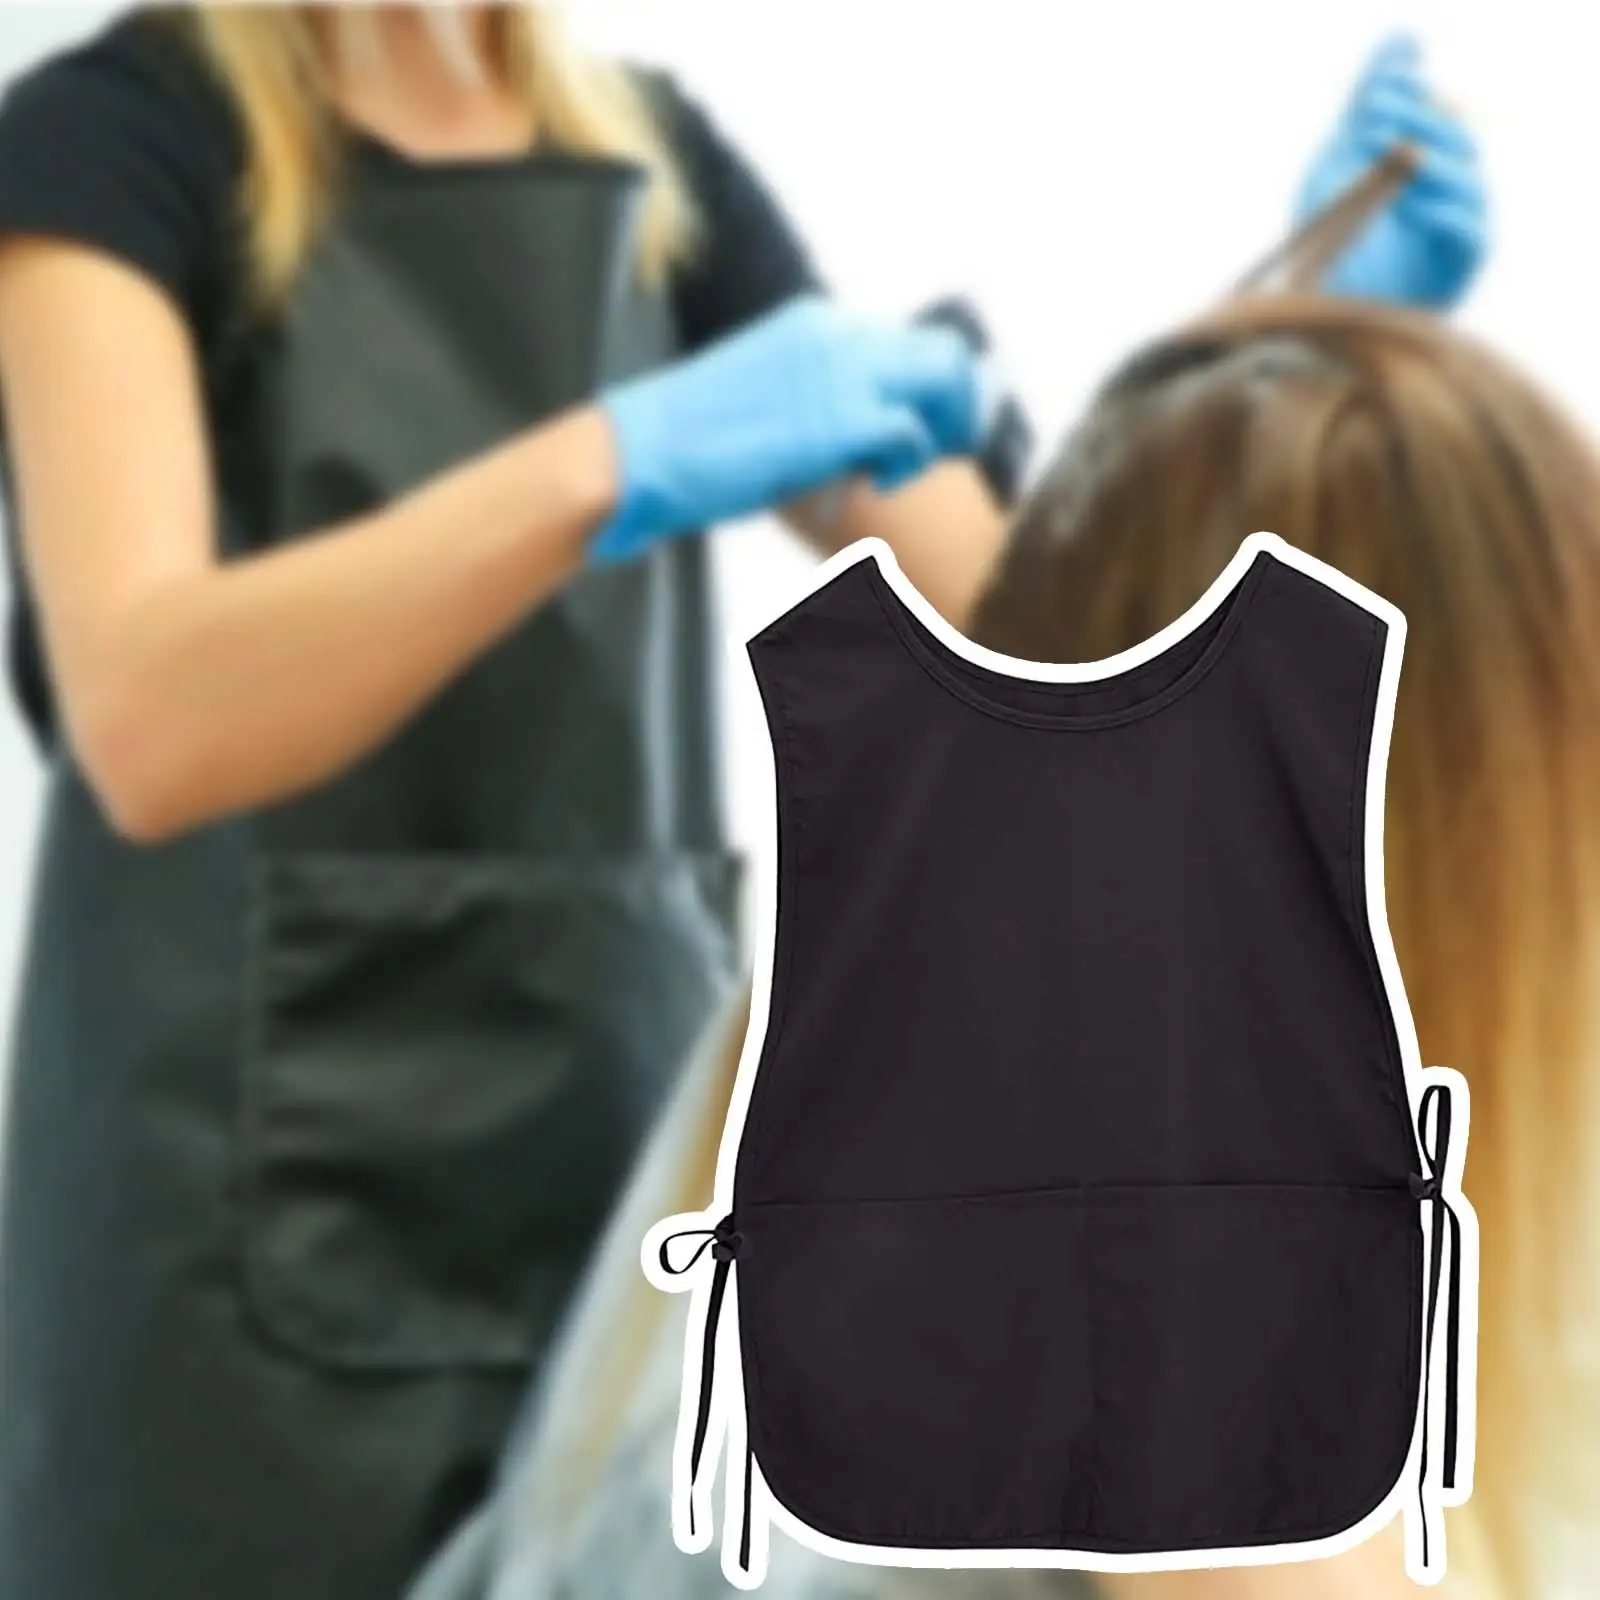 Salon Hair Stylist Apron Washable with Pocket Professional Practical for Yard Artist